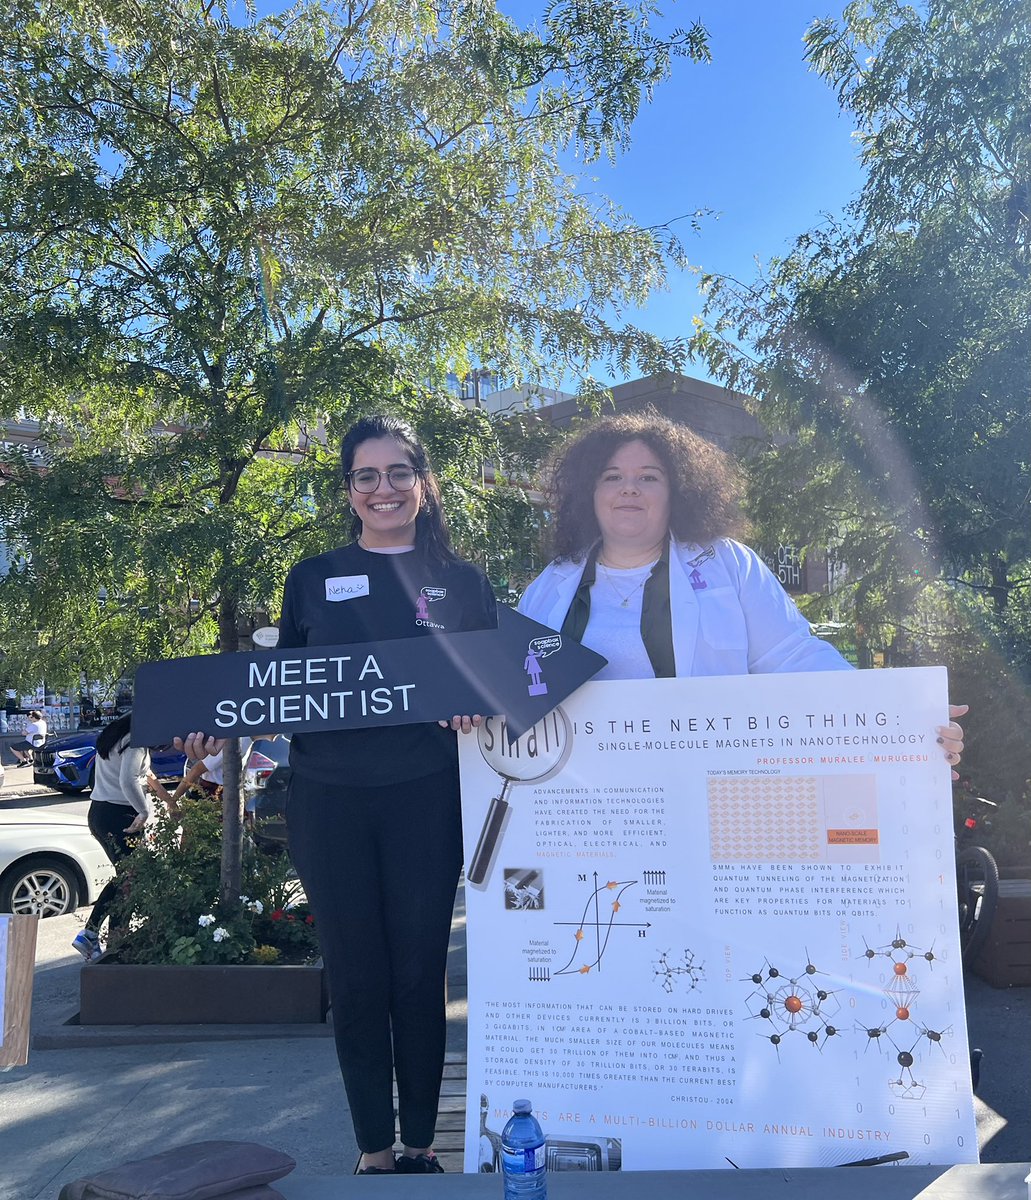 It was an amazing experience to participate in @SoapboxOTT. It was wonderful to meet all the female scientists. Proudly presenting the poster by @m_murugesu with my colleague @niki_mavragani who gave an enlightening talk on magnetism today.